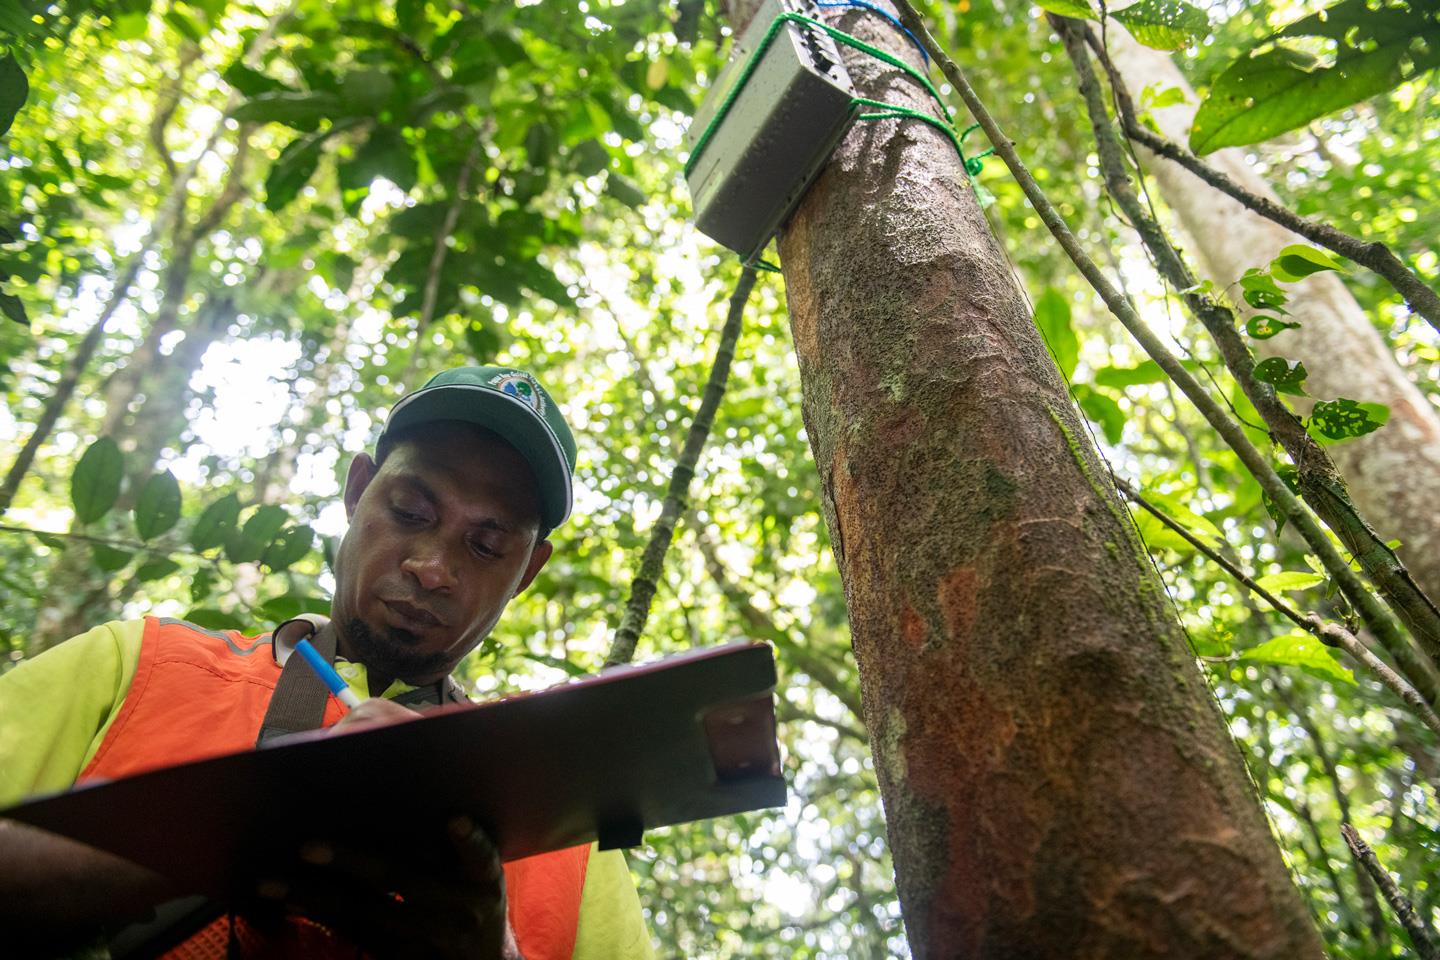 With a new tool called Open Foris Ground, the fruit of a collaboration between FAO and Google, Besta can demarcate and monitor his forest area through a map interface to make sure that the forests stay intact from incursions. ©FAO/ Cory Wright